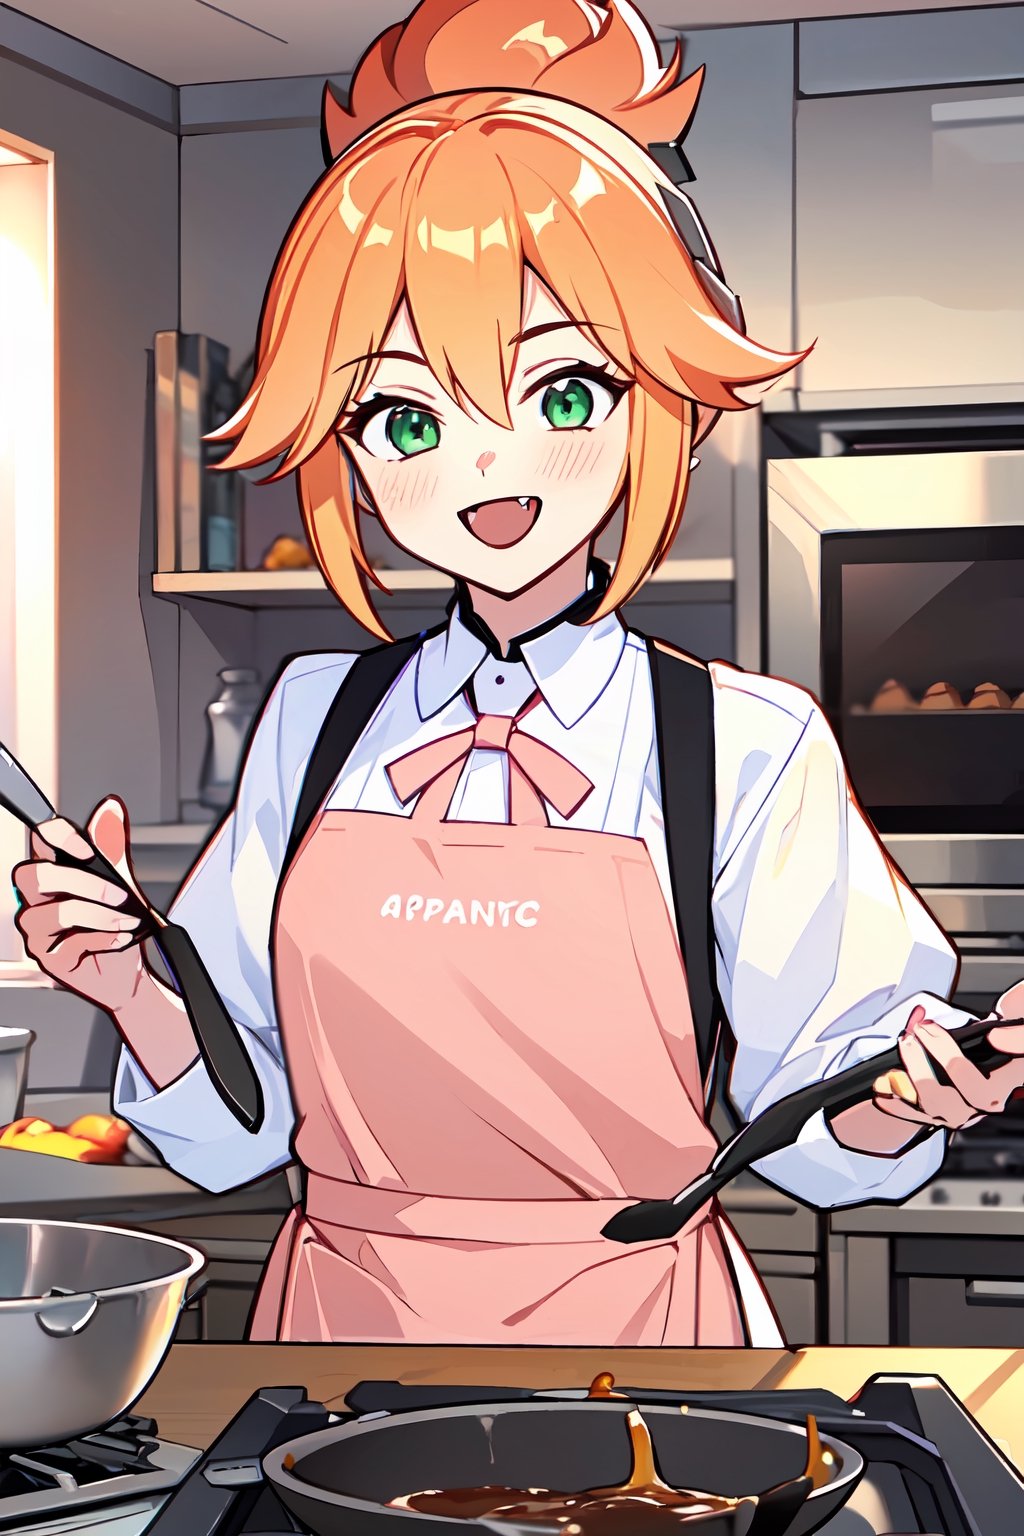 fanny, green eyes, short ponytail hair, orange hair, upper body, happy, enthusiastic, smiling, fangs, shy, holding cooking utensils, aspirants white shirt, pink apron, cooking food, indoors kitchen, cooking ingredients, kitchen tools, masterpieces, color details and black lines,